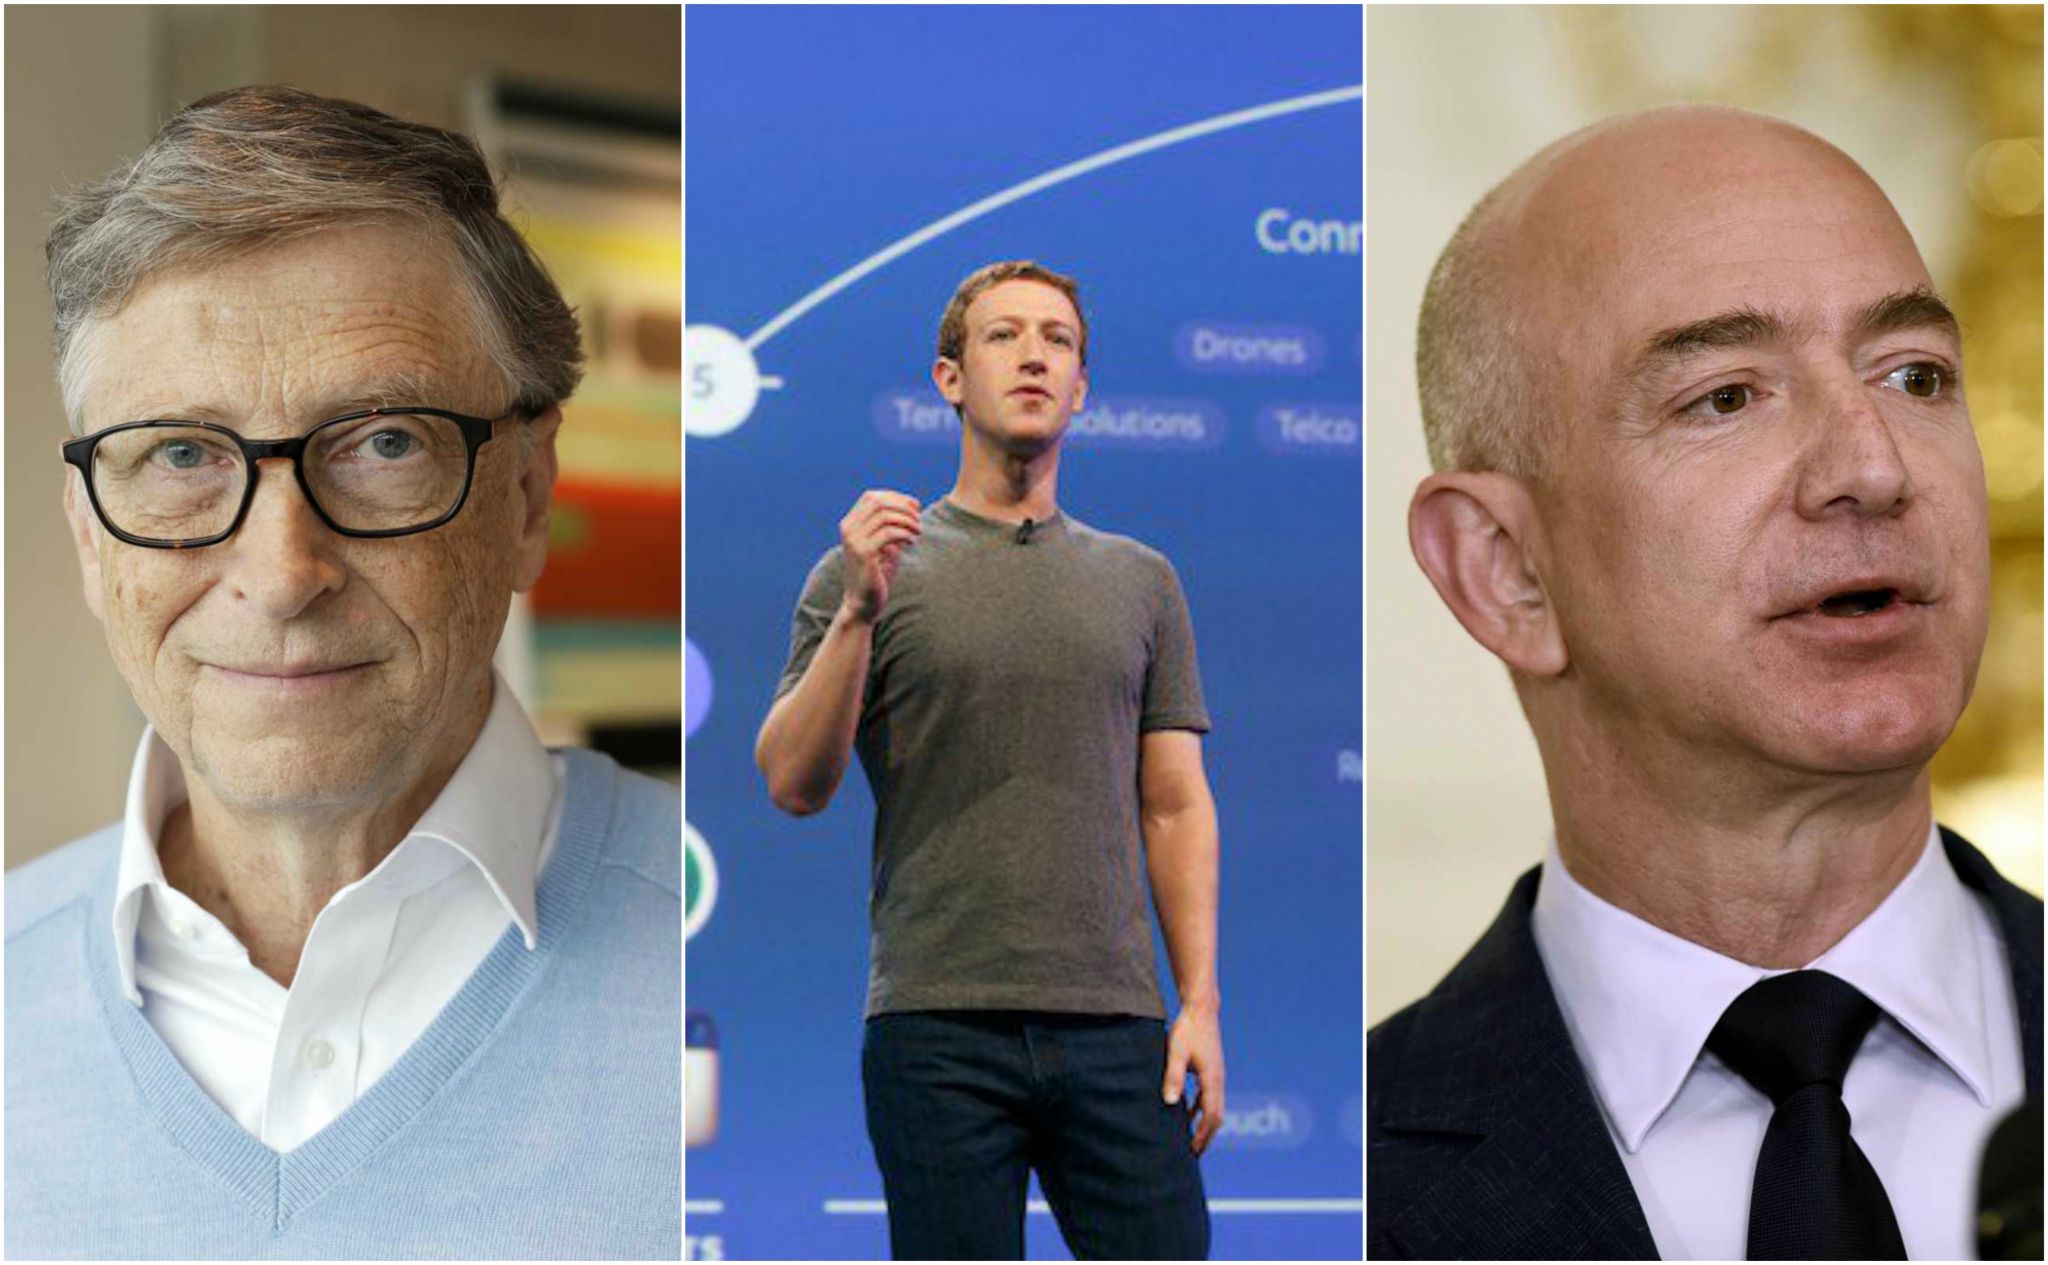 These are the 25 richest people in the world, according to Forbes